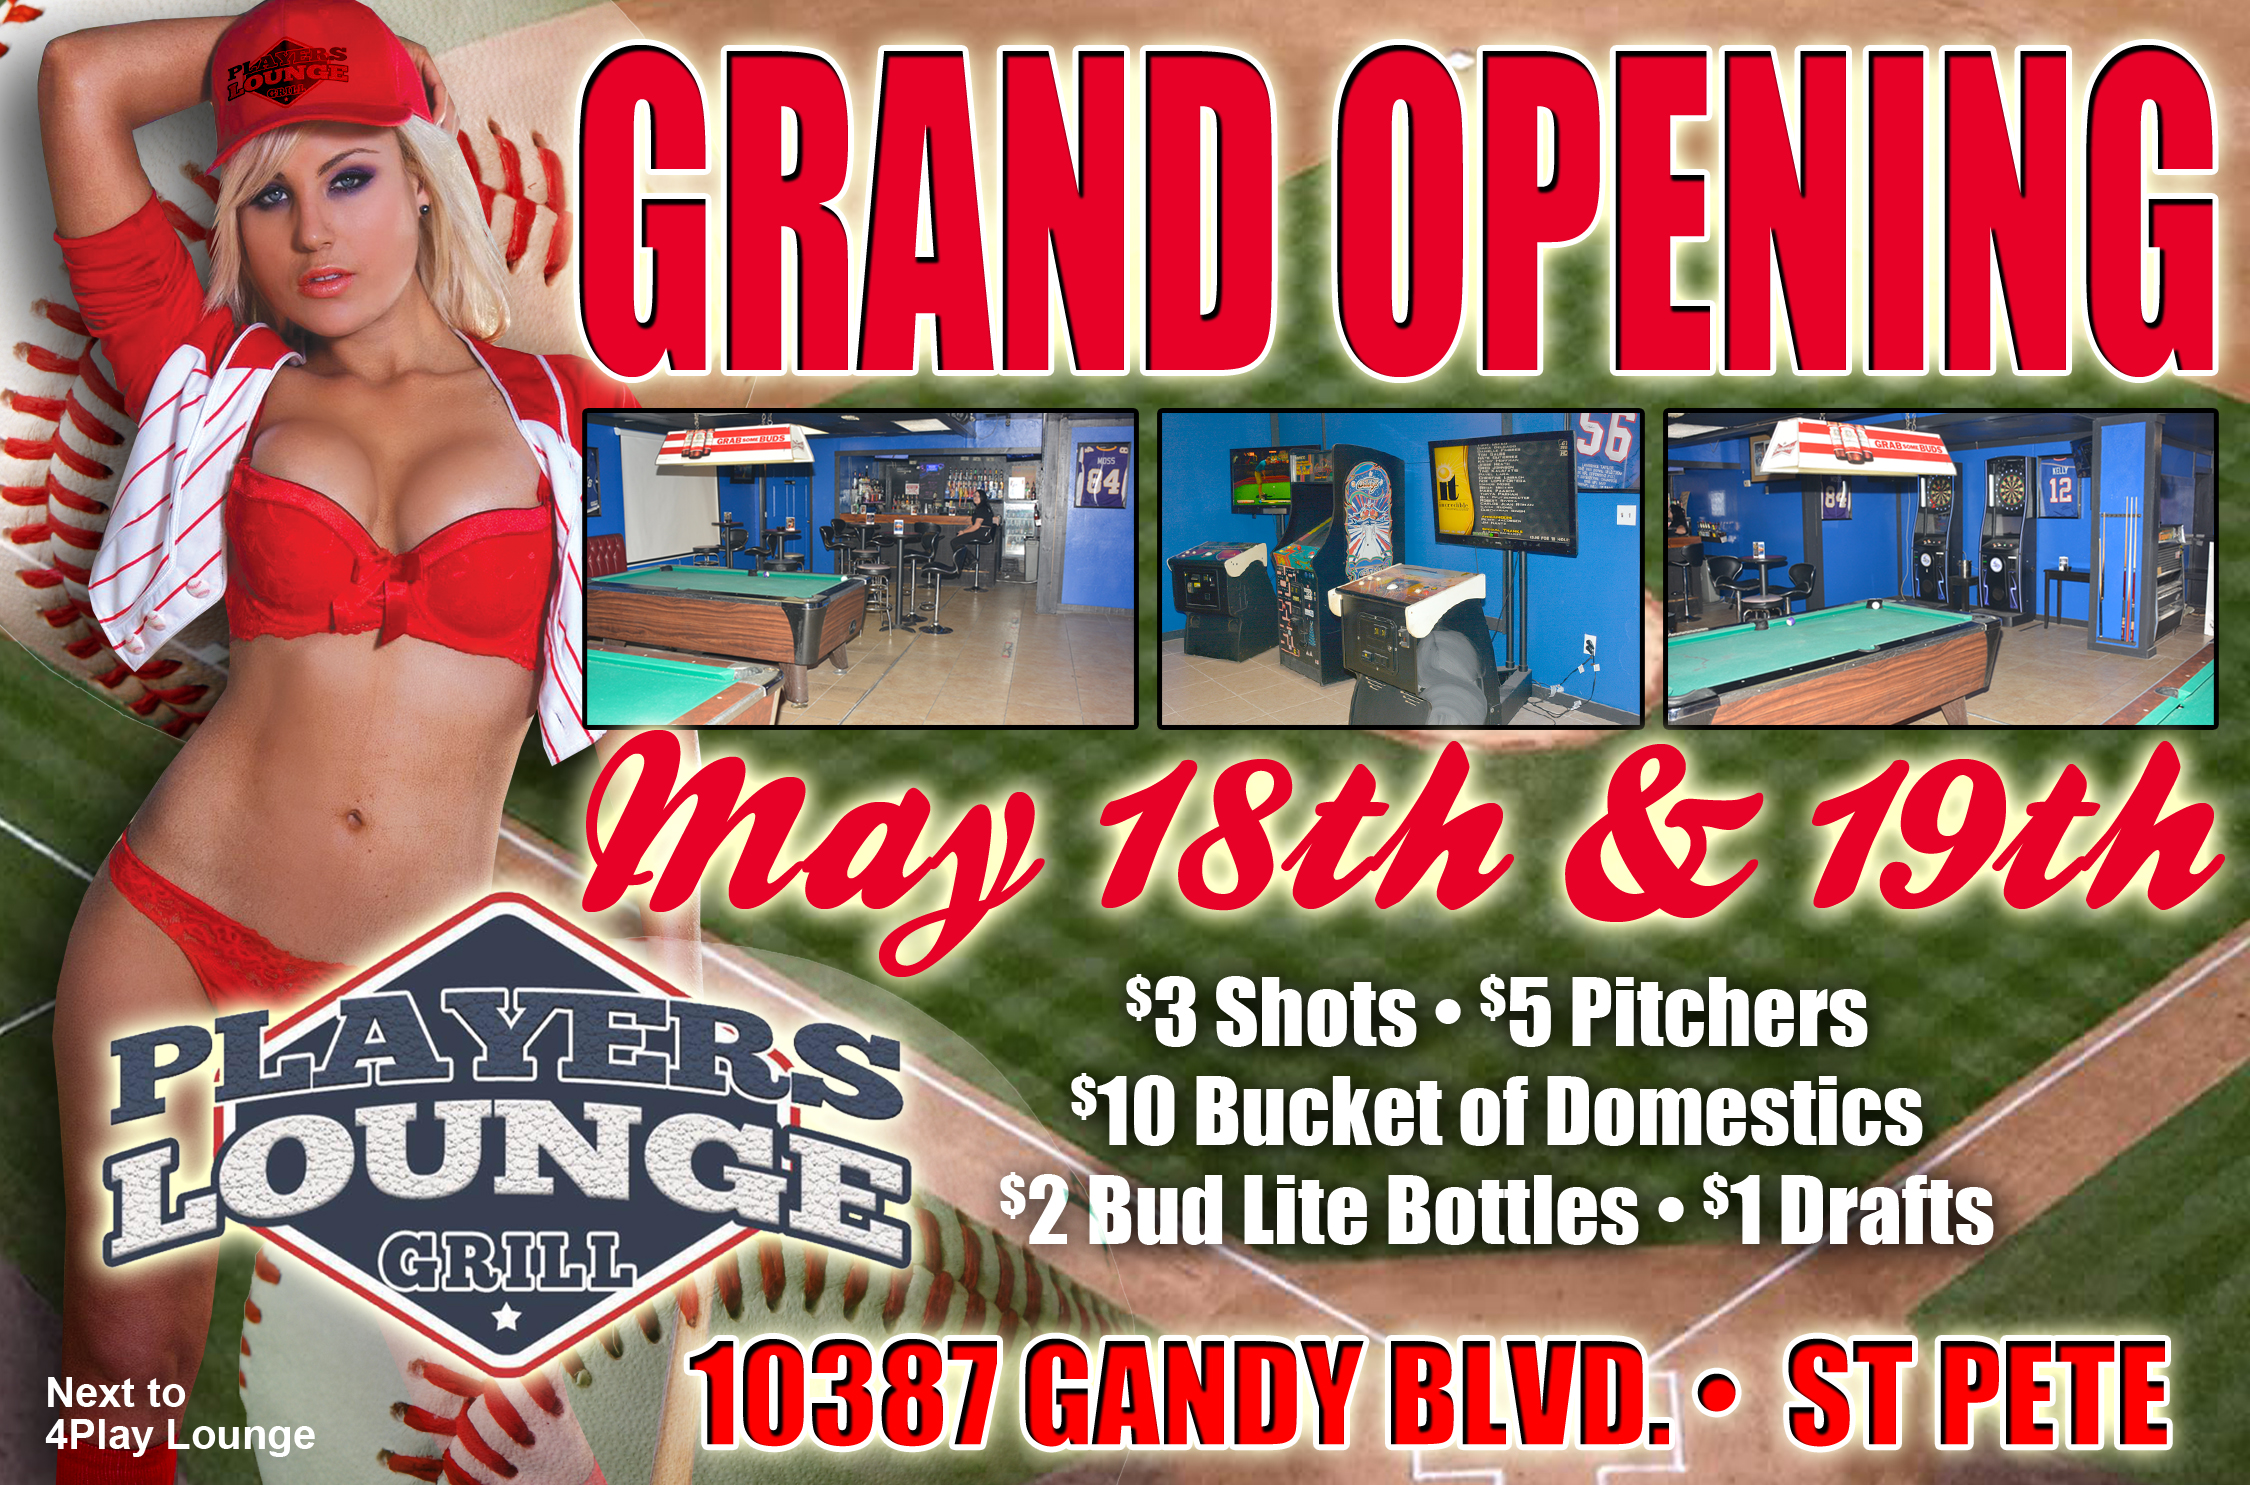 Players Lounge Grill Grand Opening